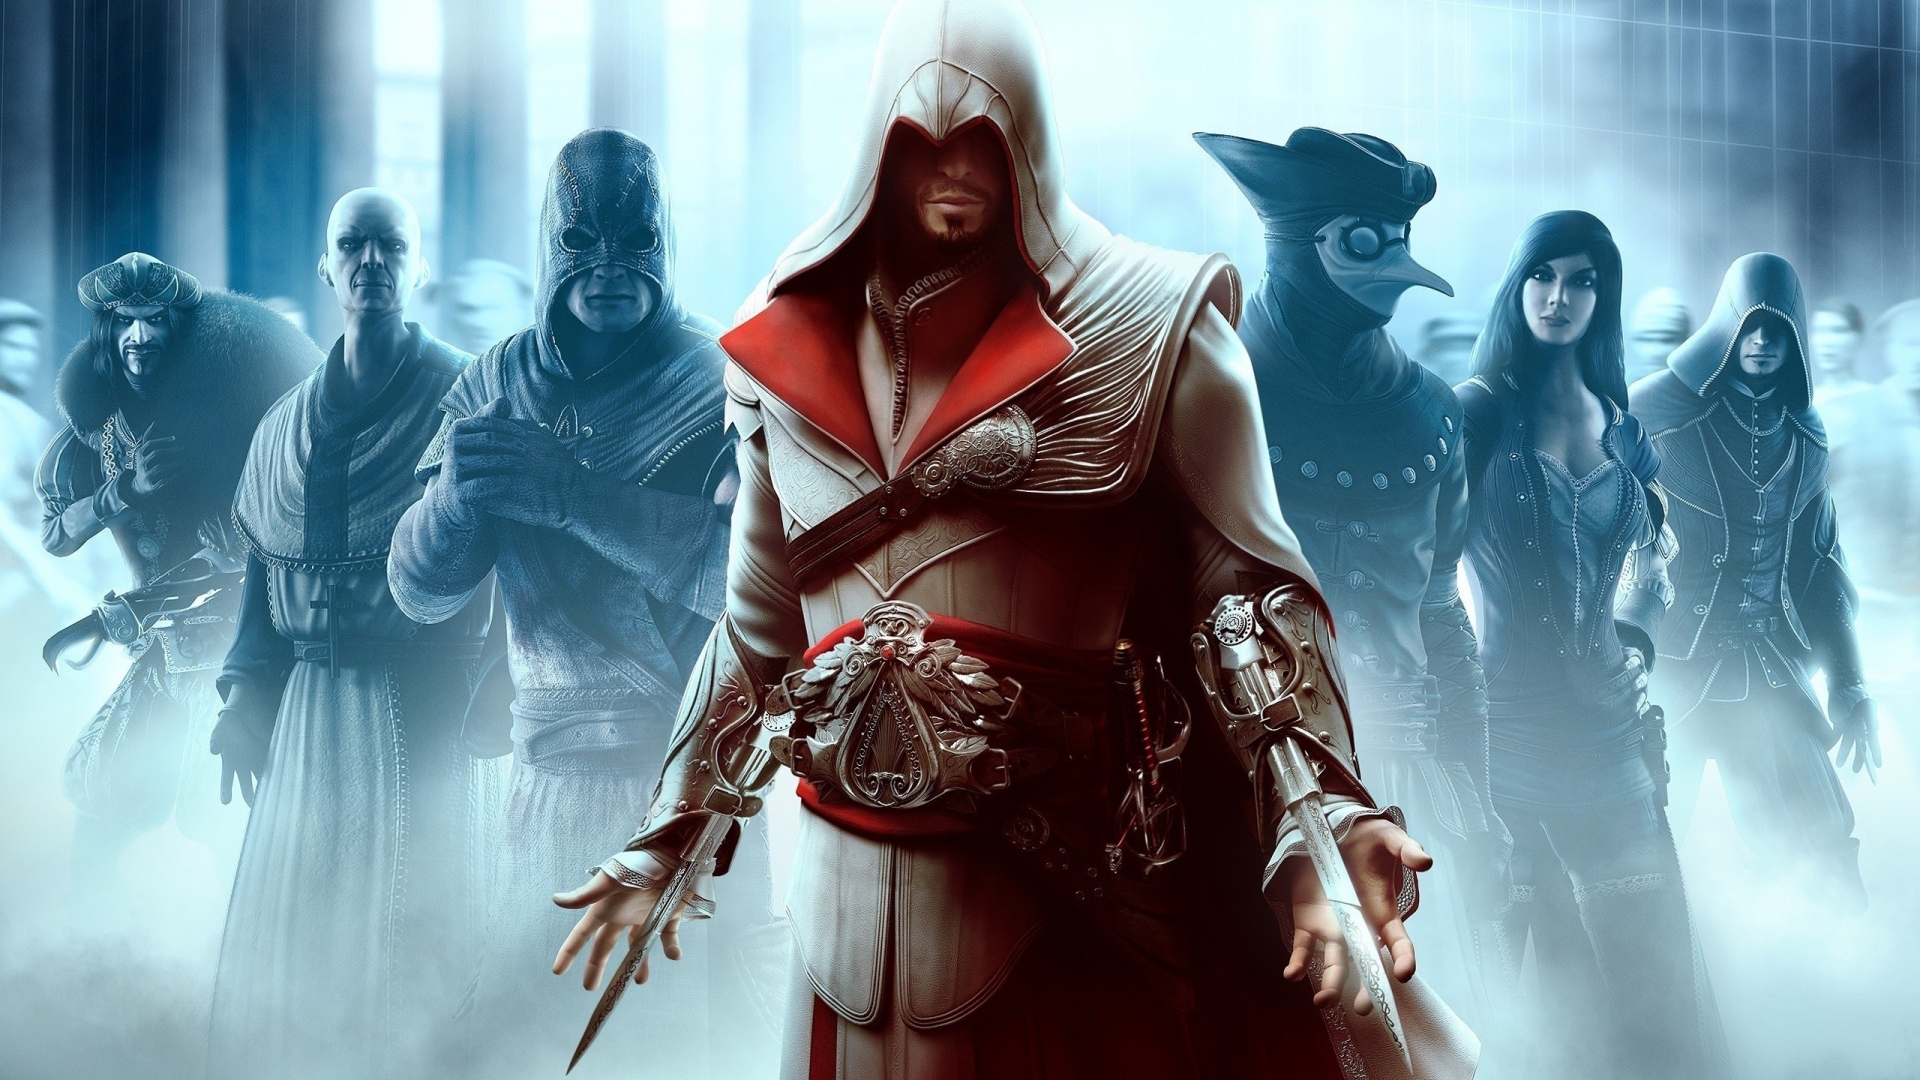 Assassin Creed Characters for 1920 x 1080 HDTV 1080p resolution